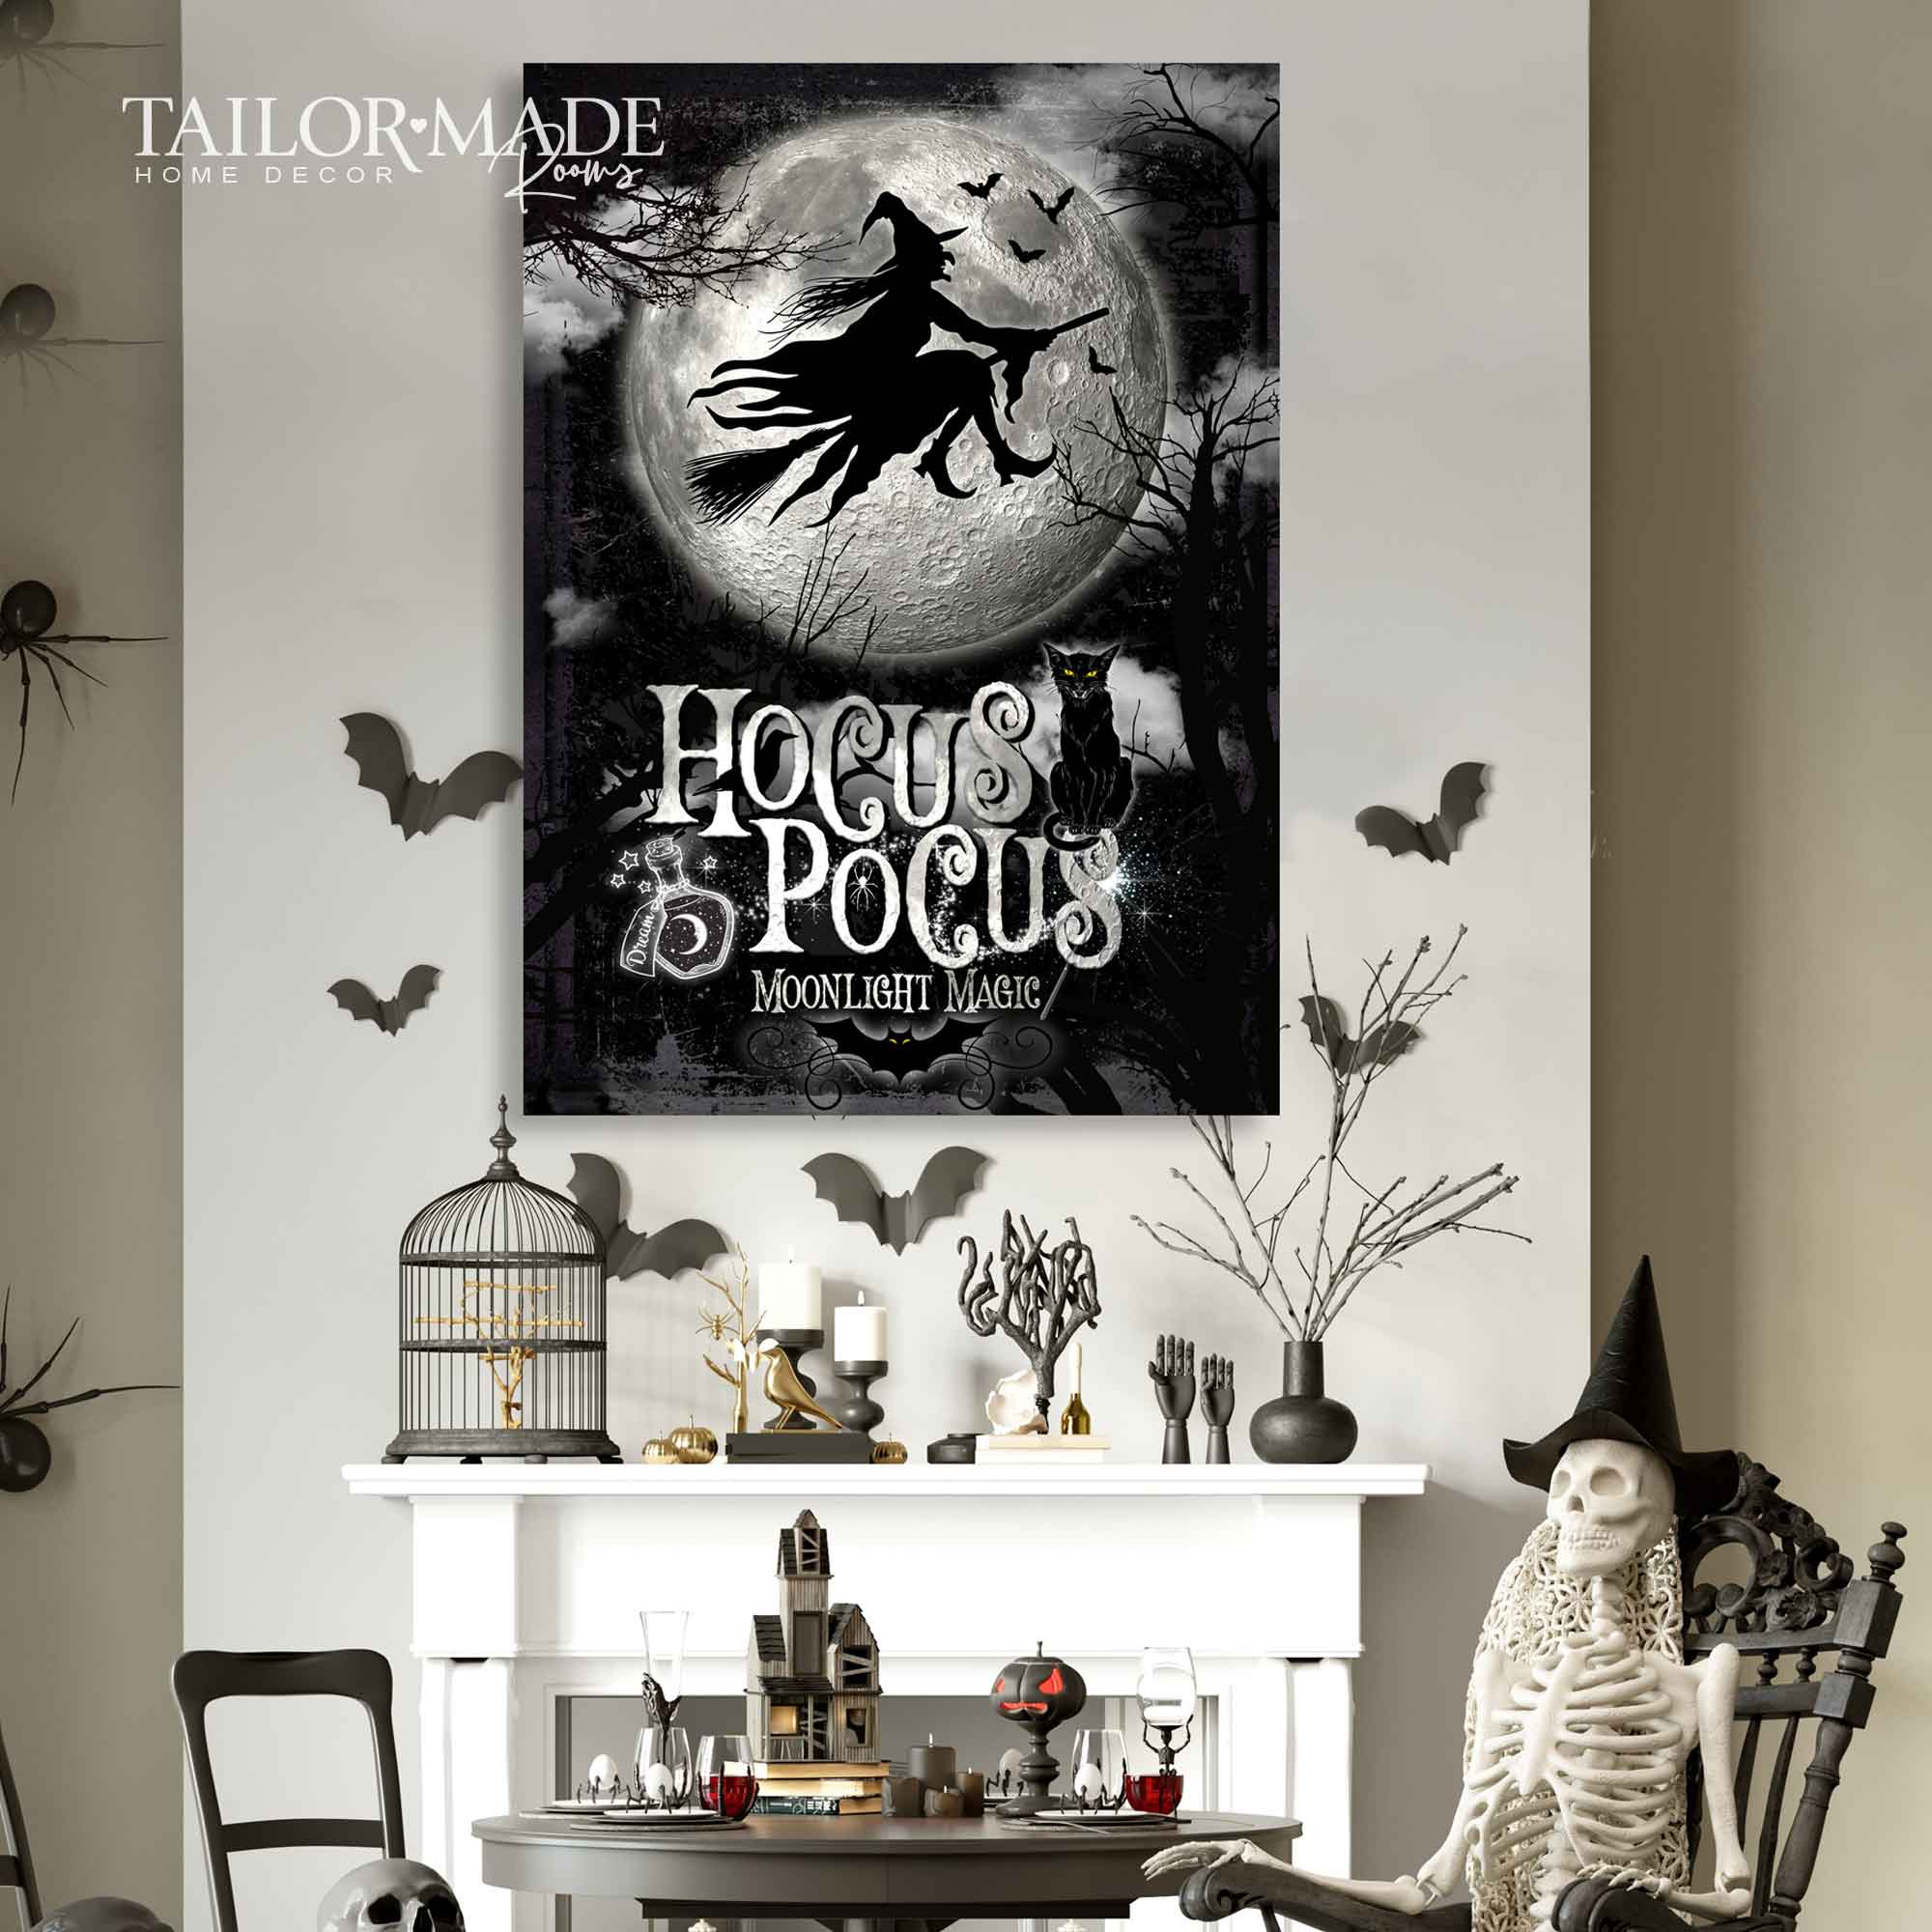 Hocus Pocus Halloween Decor on black background and a cloudy night and a wicked witch is flying in the moonlight with words Hocus Pocus